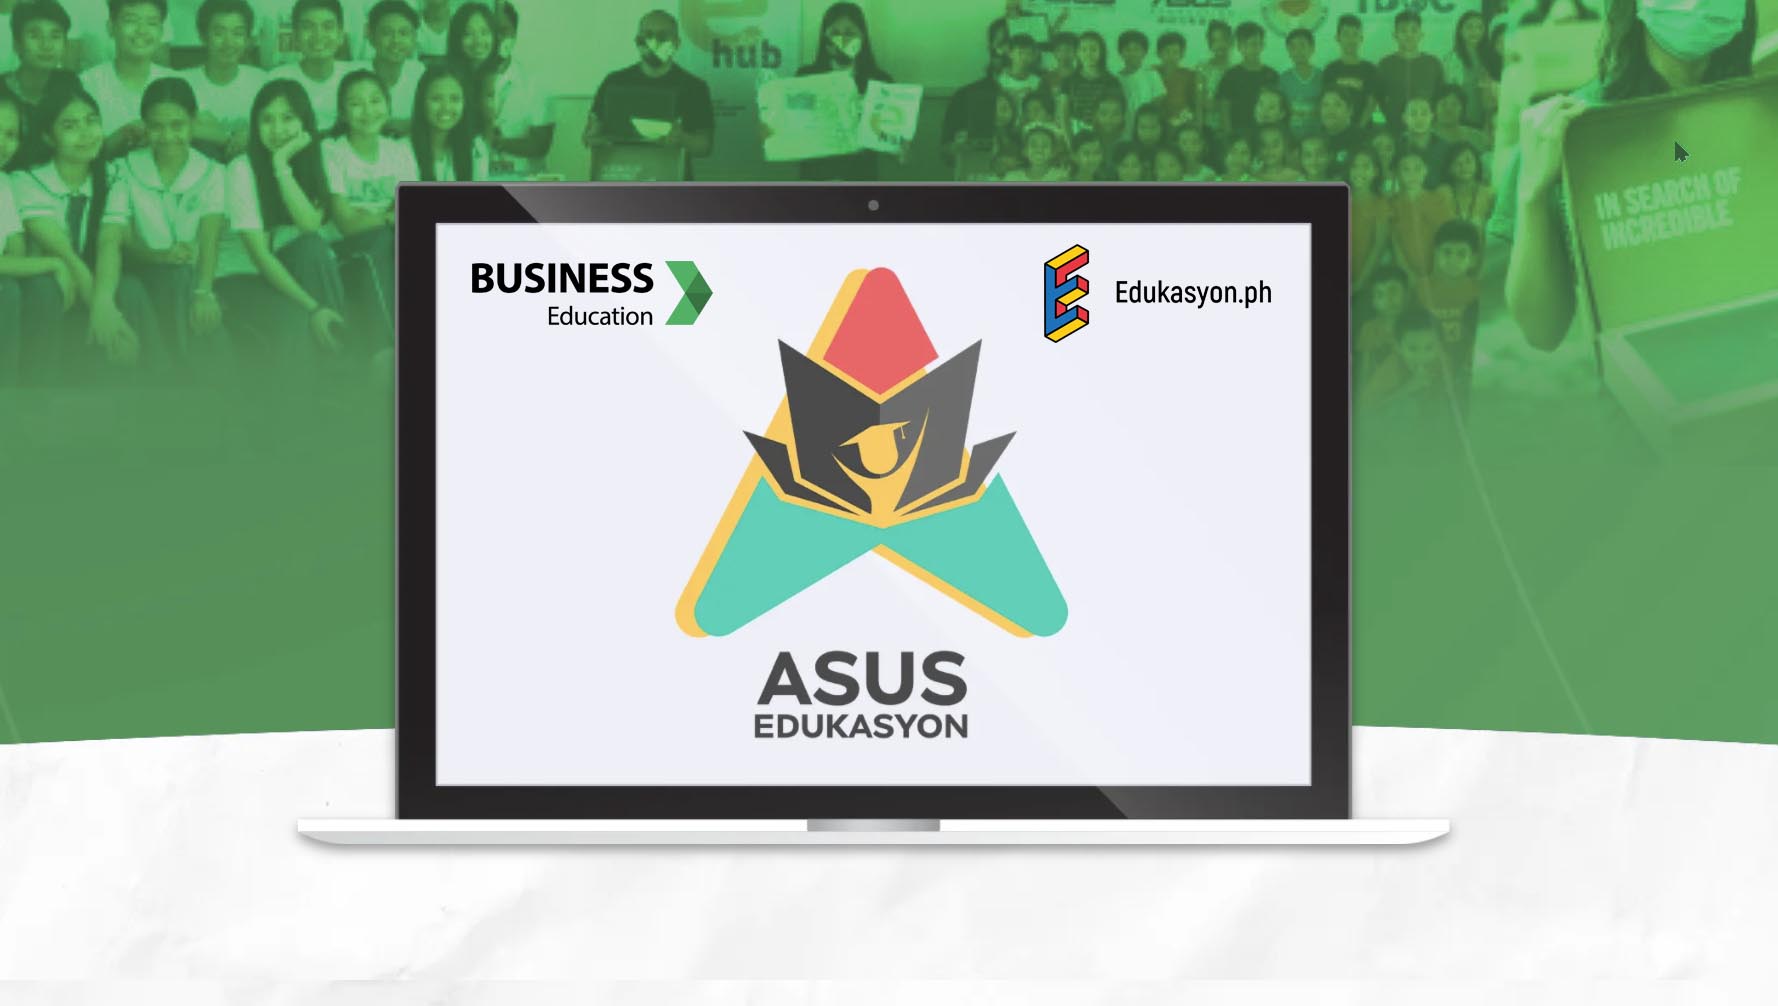 Edukasyon.PH partners with ASUS to target school IT departments for better learning outcomes